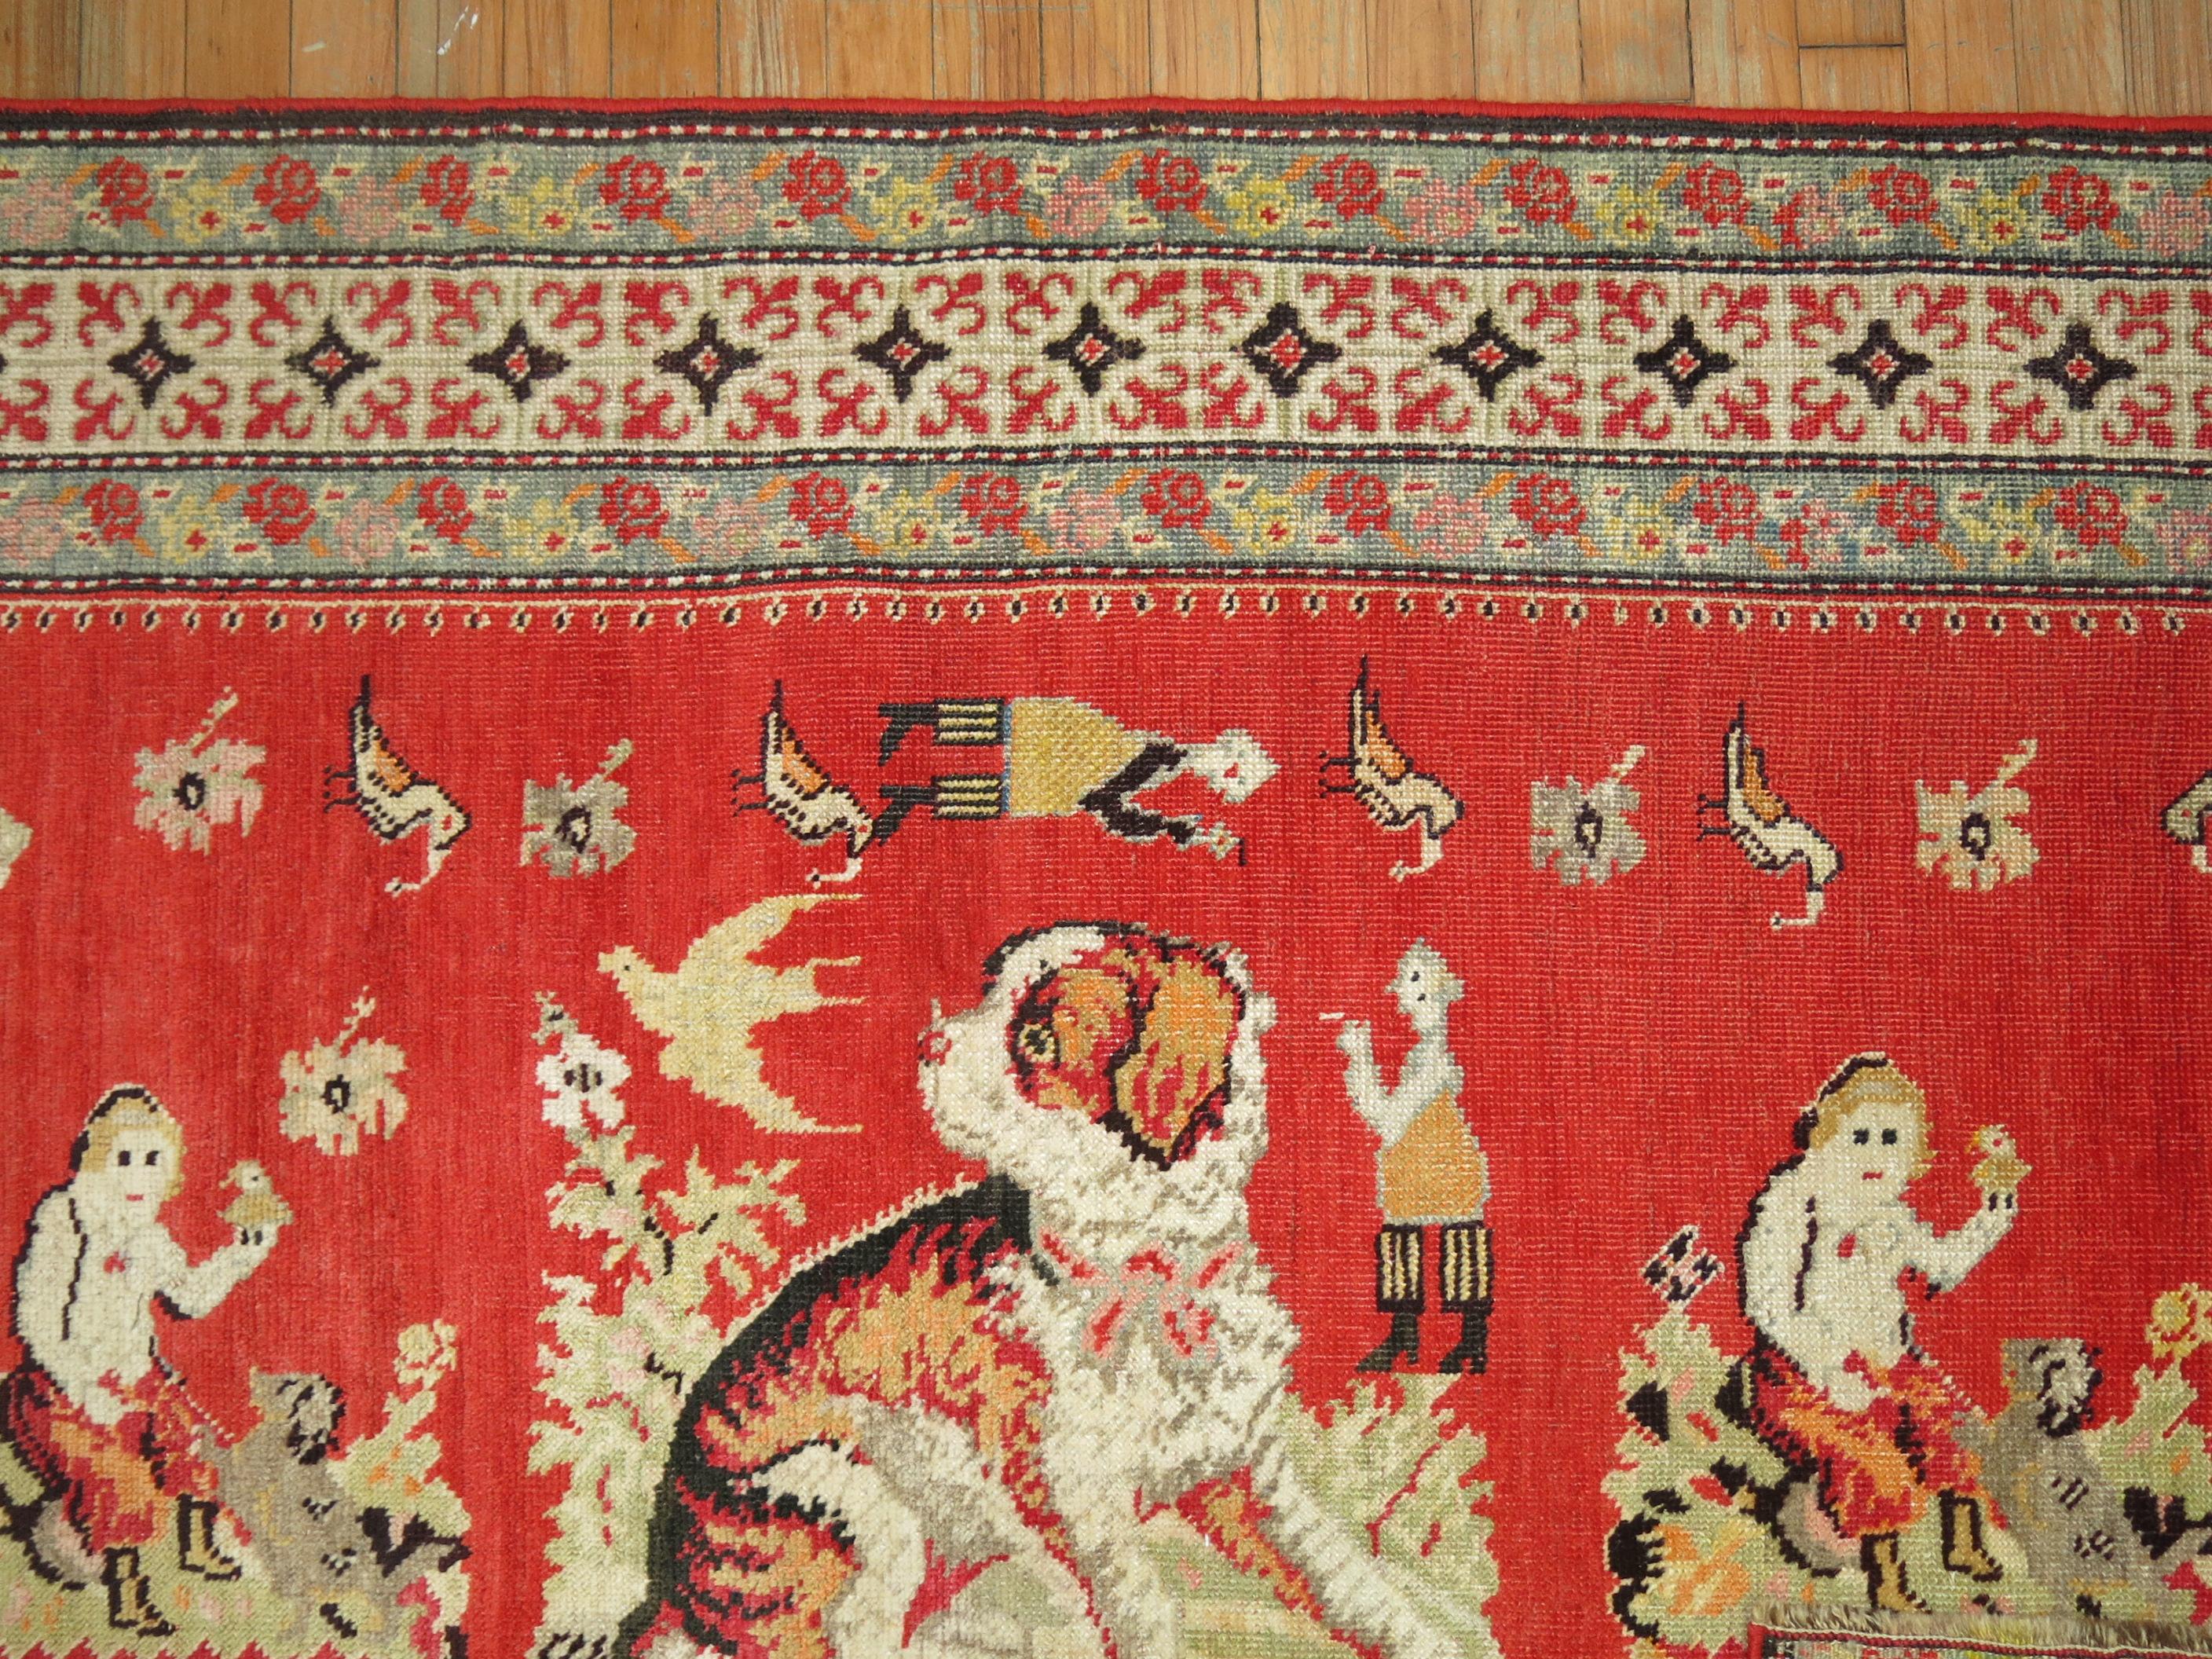 A pictorial rug depicting a dog floating around different human, animals and figures on a red ground.